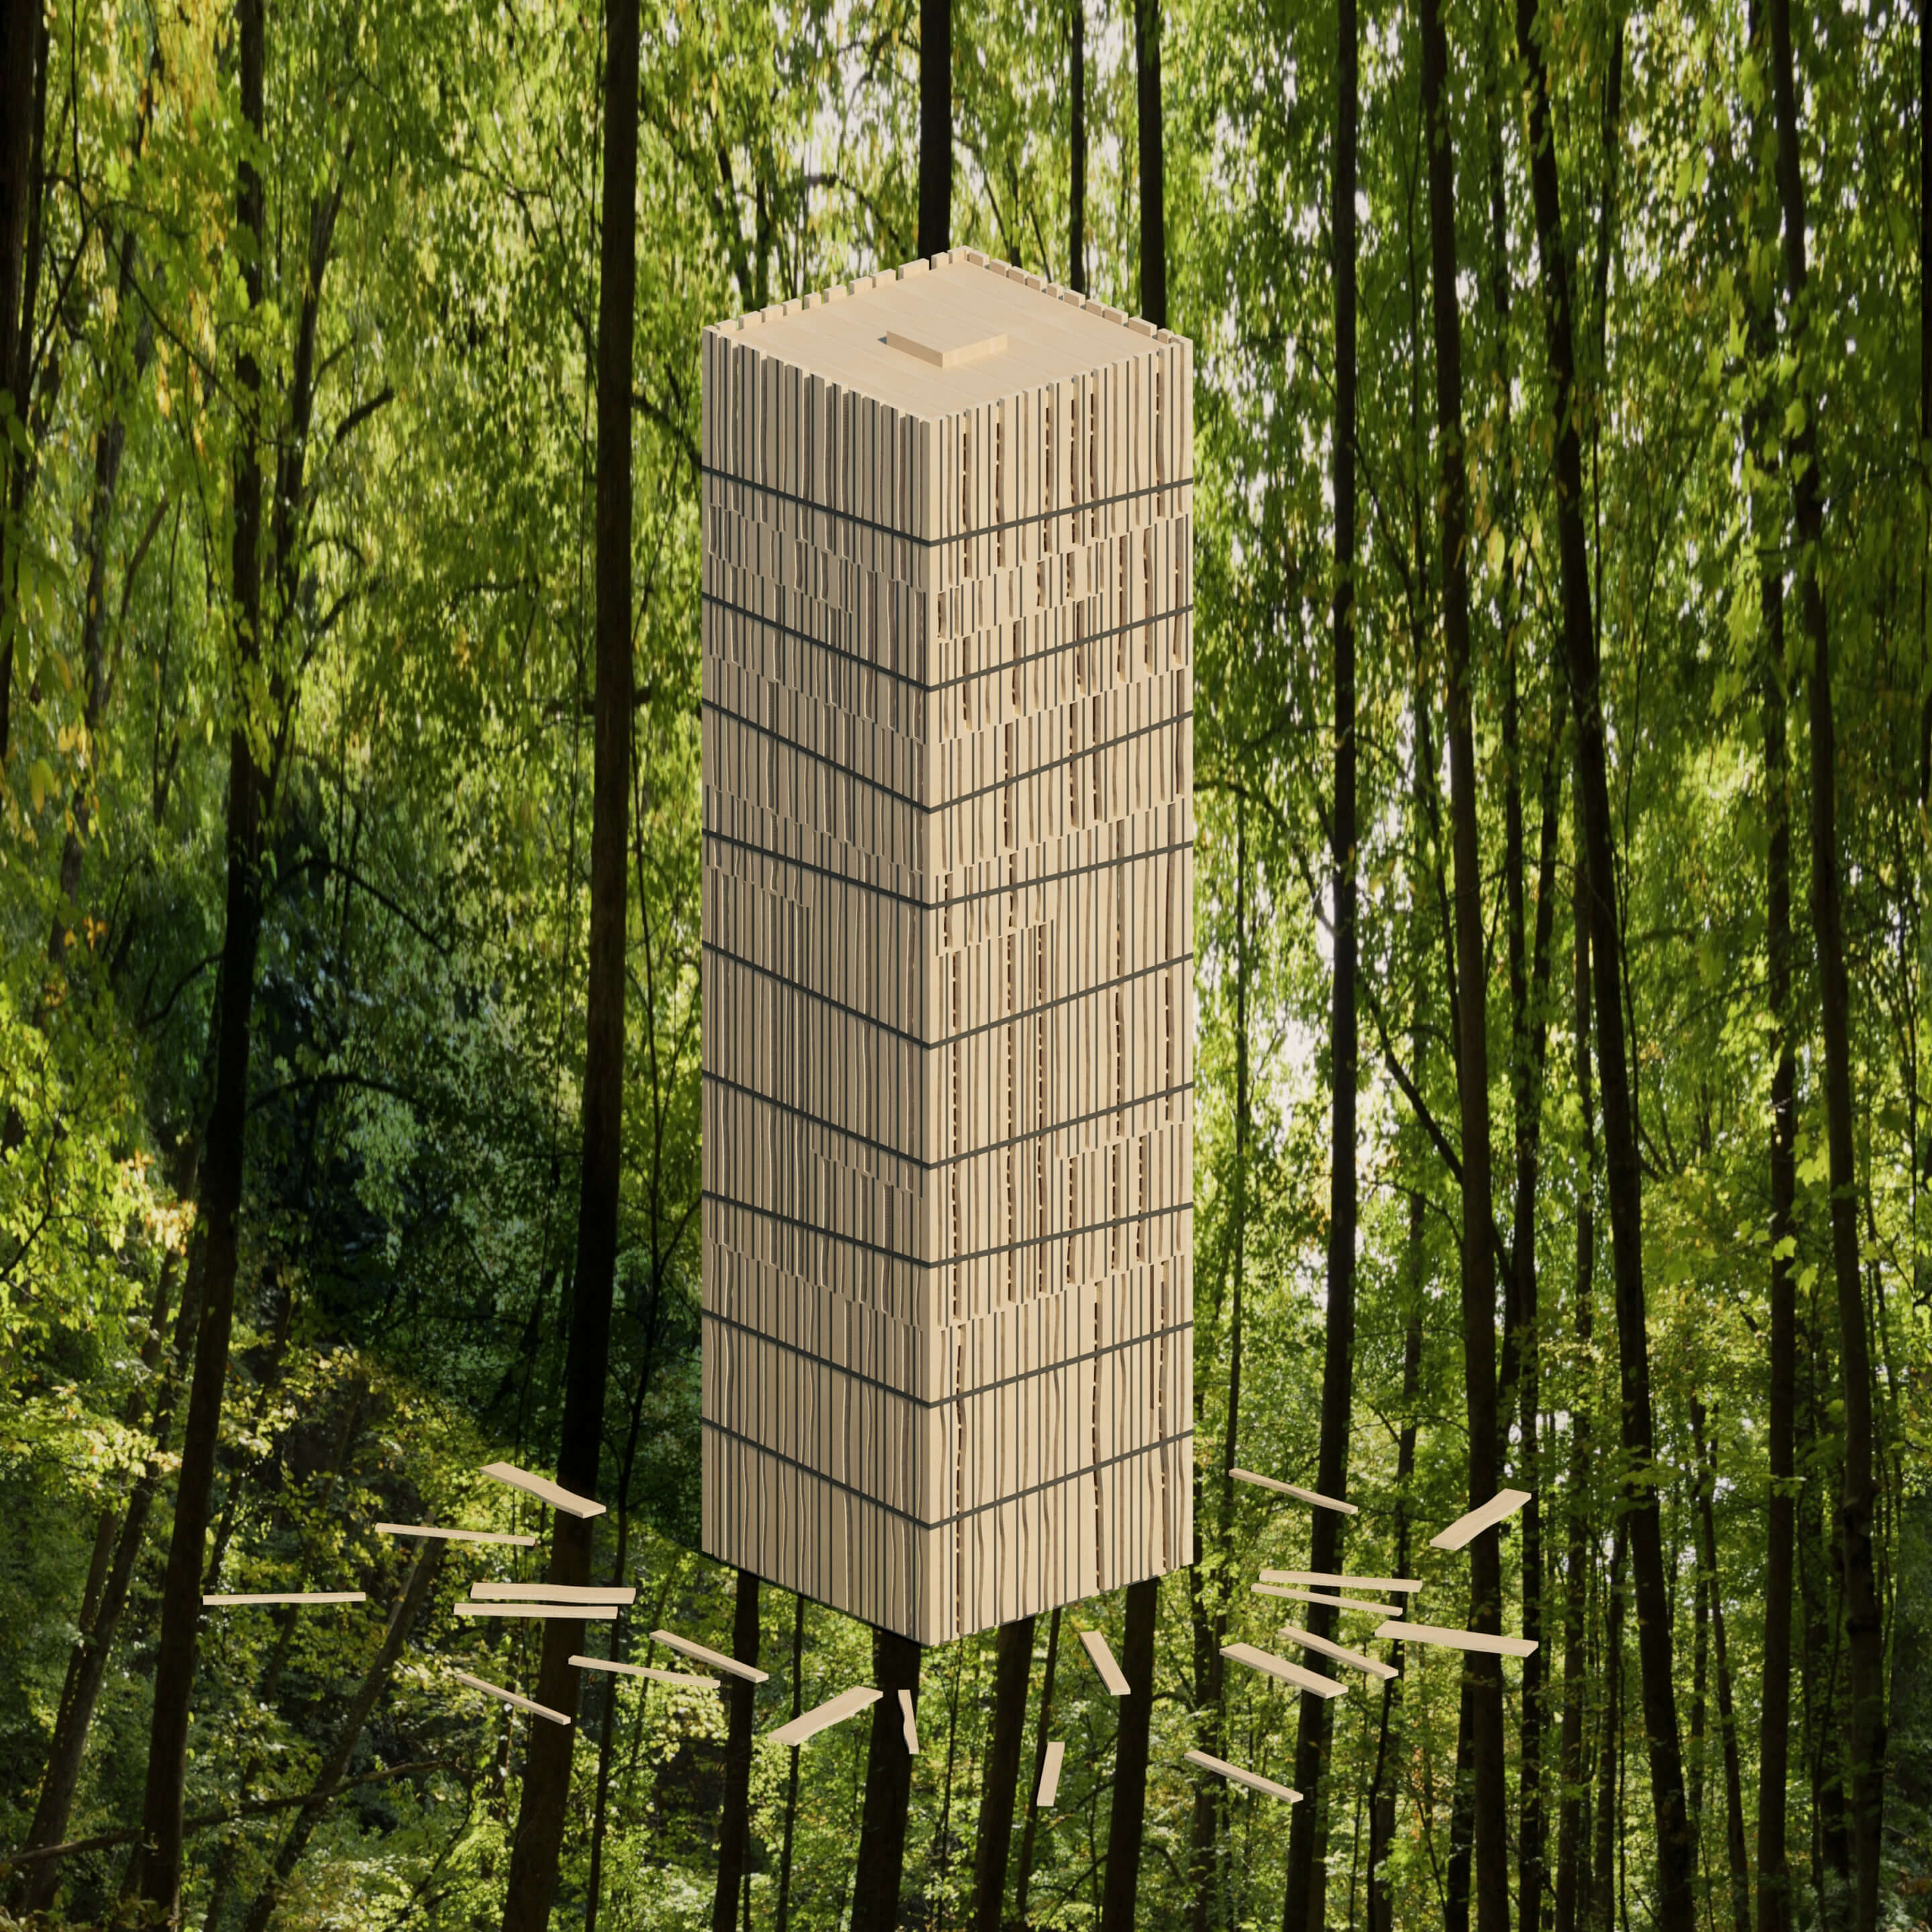 Rendering of a timber tower against bamboo